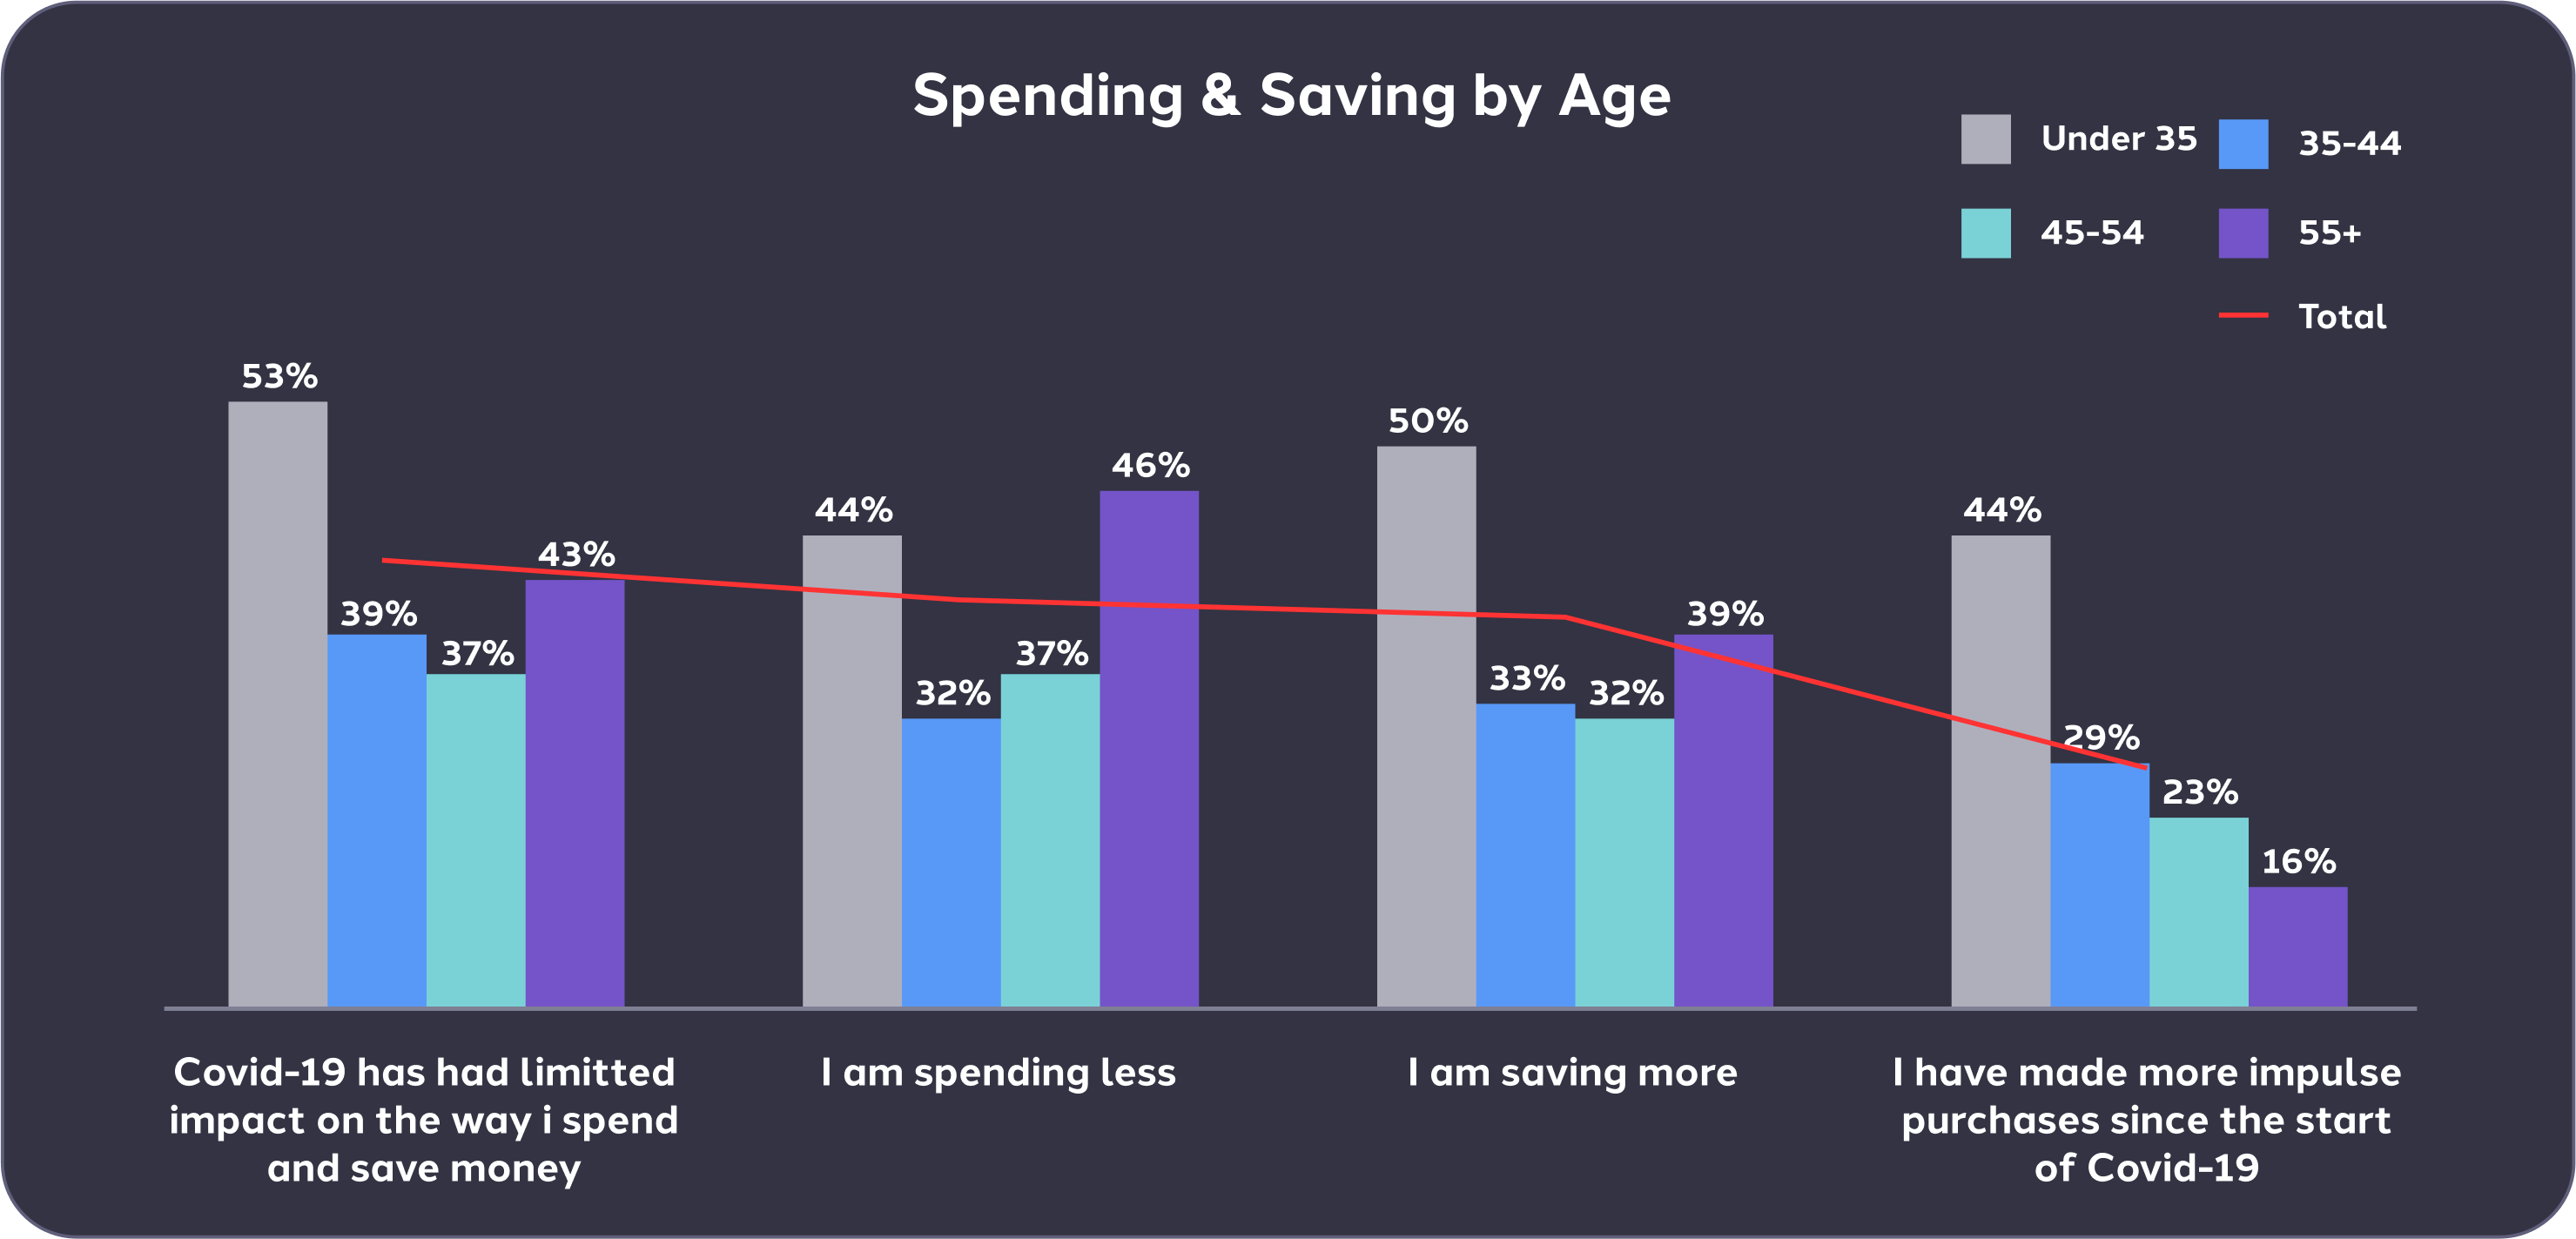 bar-chart-showing-spending-and-saving-trends-by-age